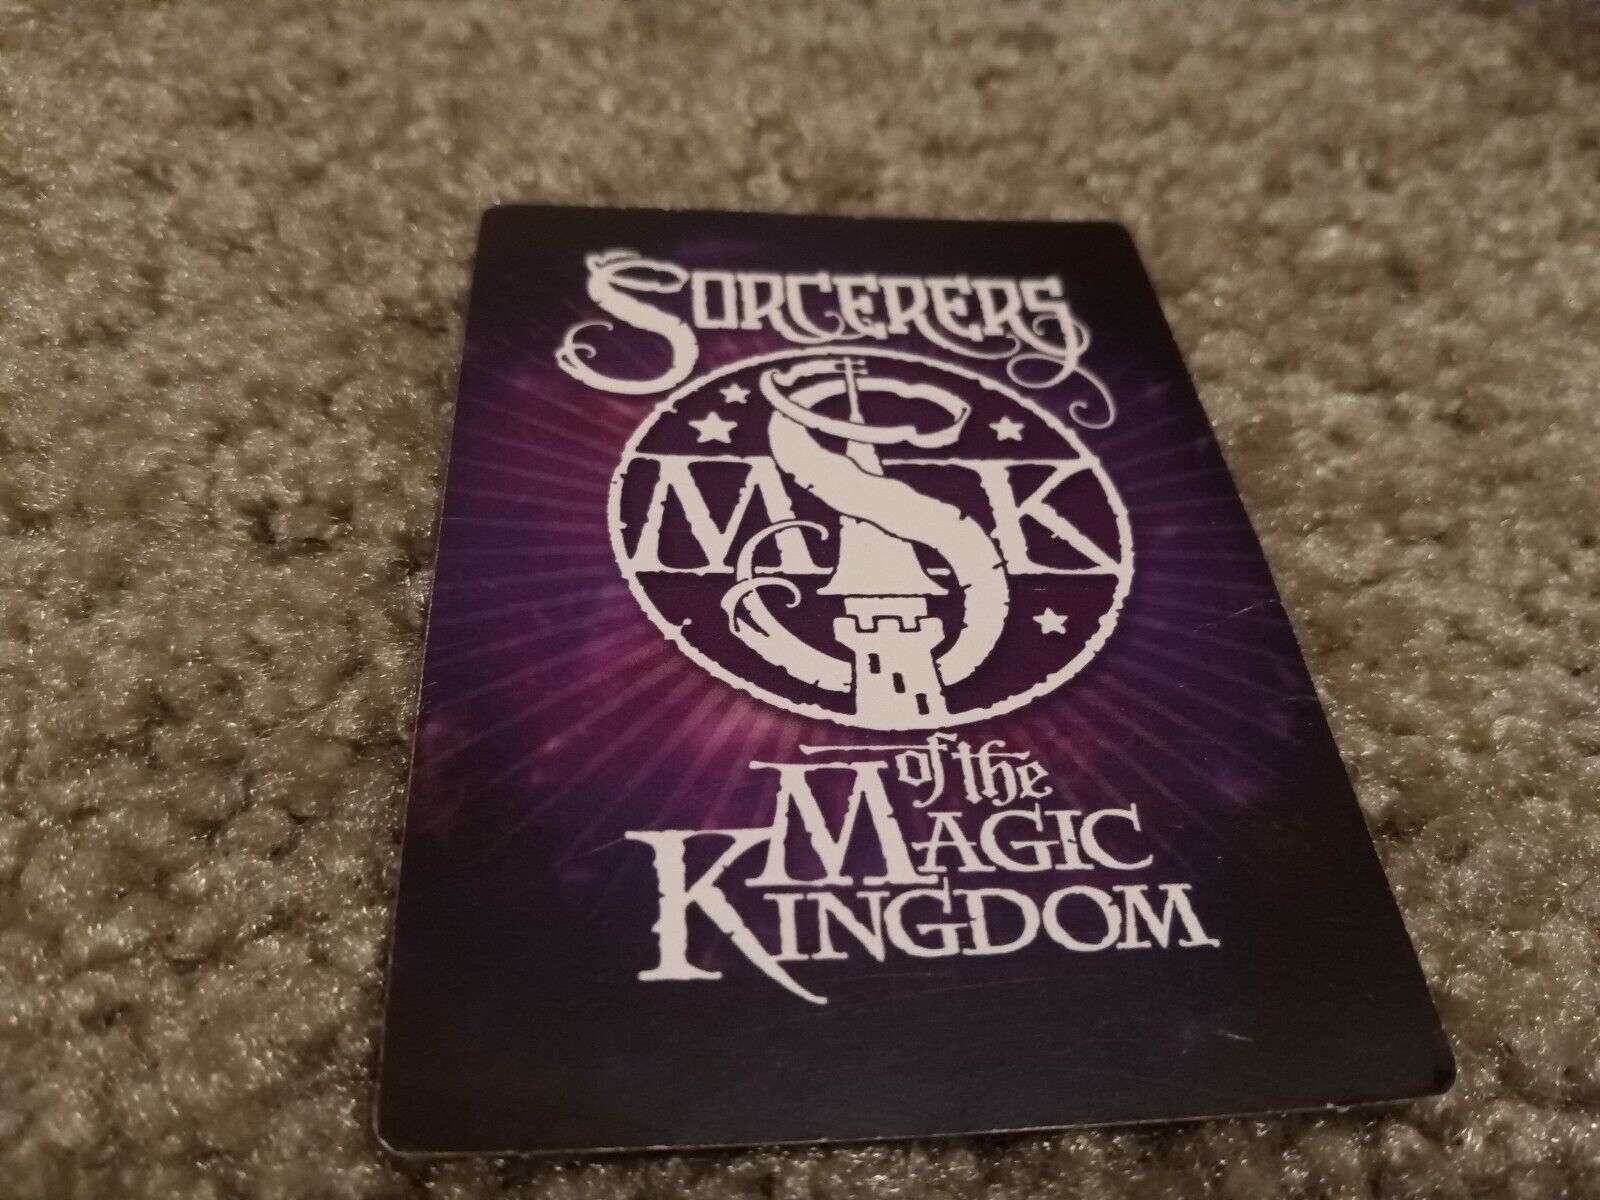 Sorcerers of the Magic Kingdom cards